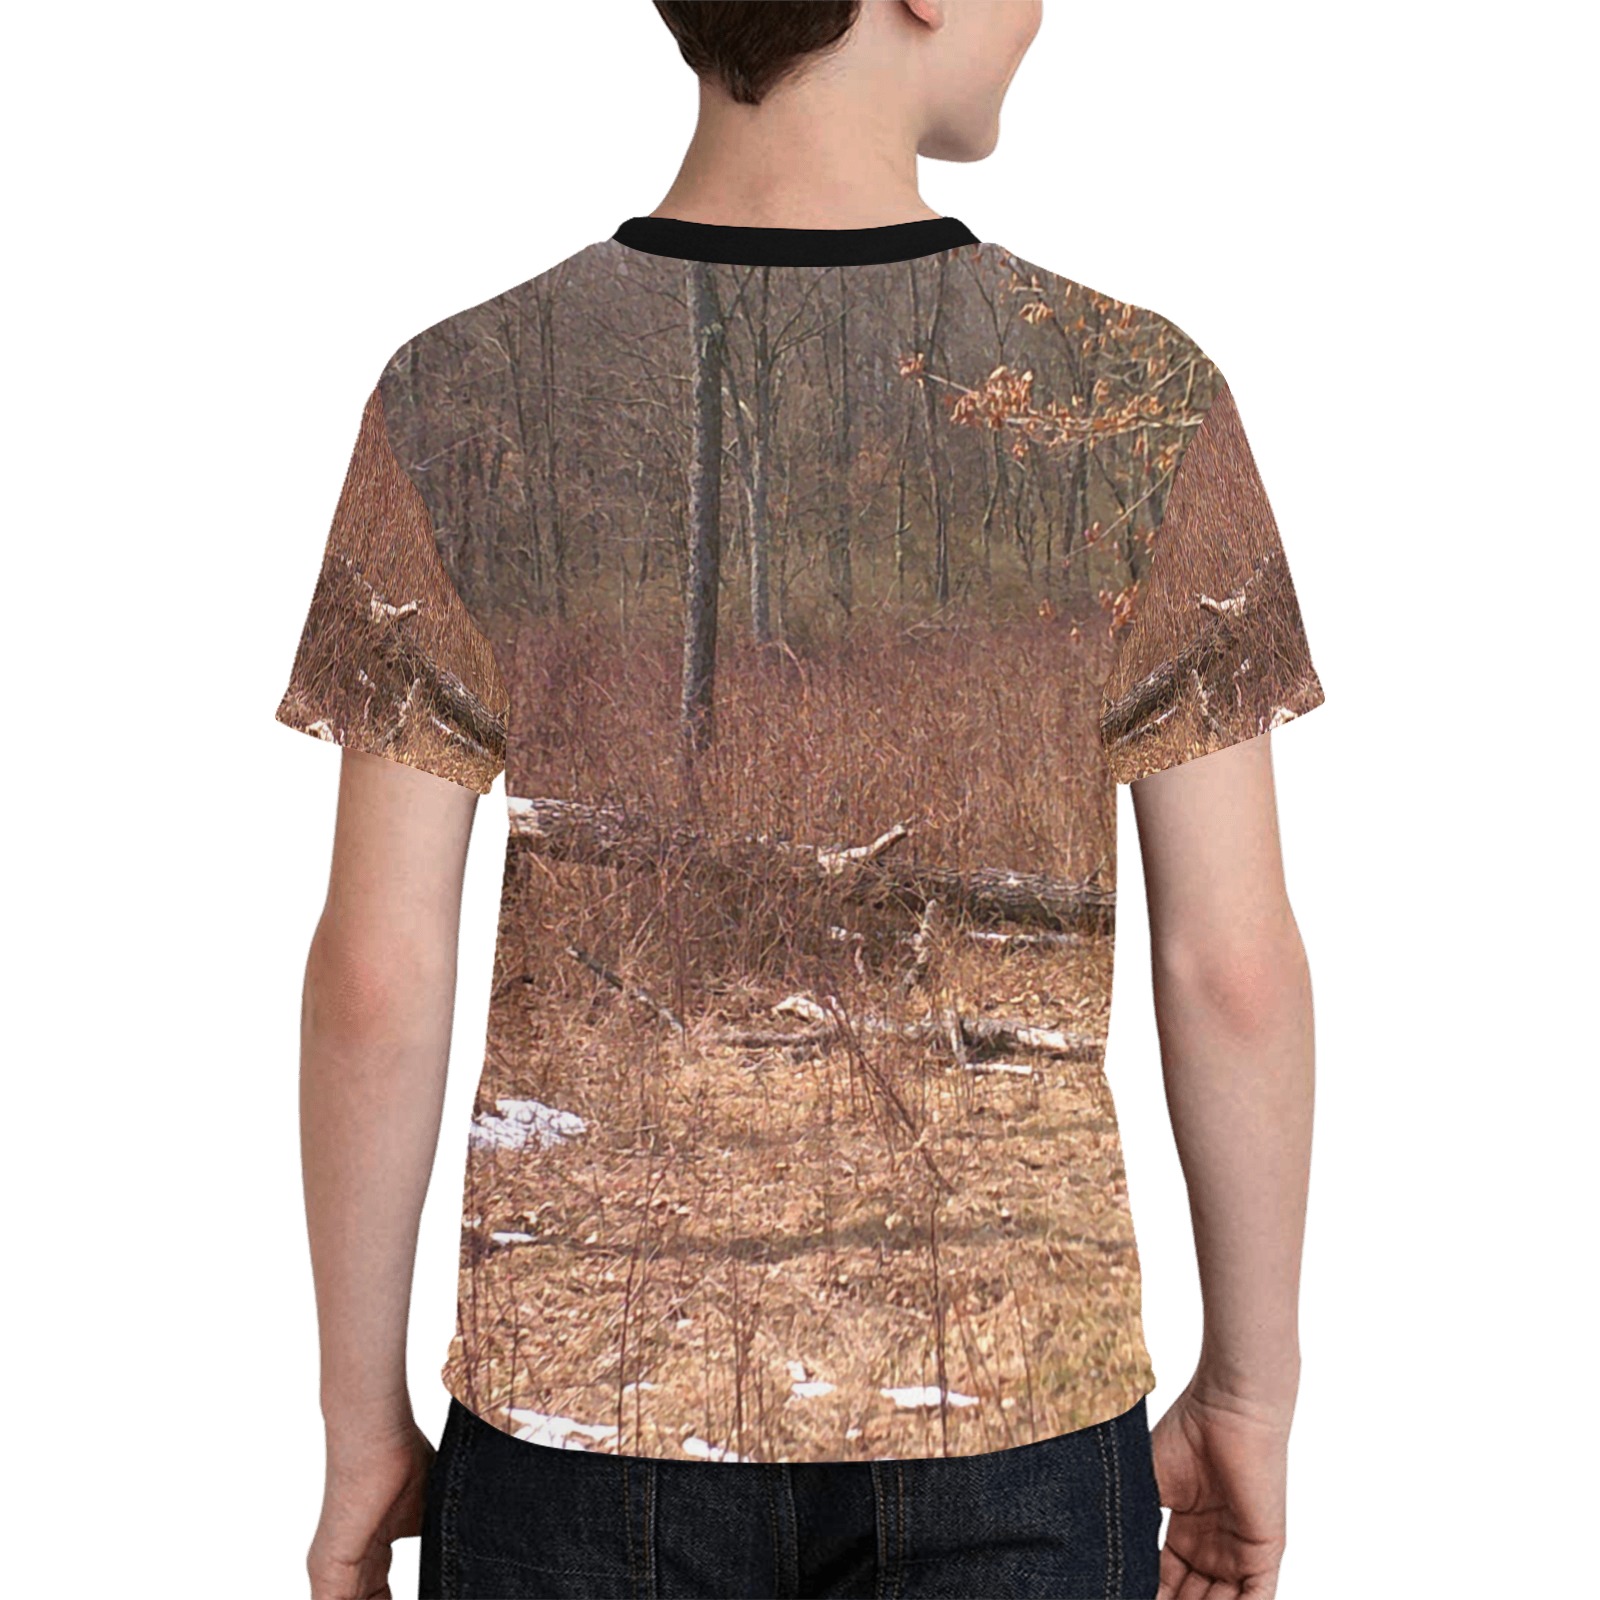 Falling tree in the woods Kids' All Over Print T-shirt (Model T65)